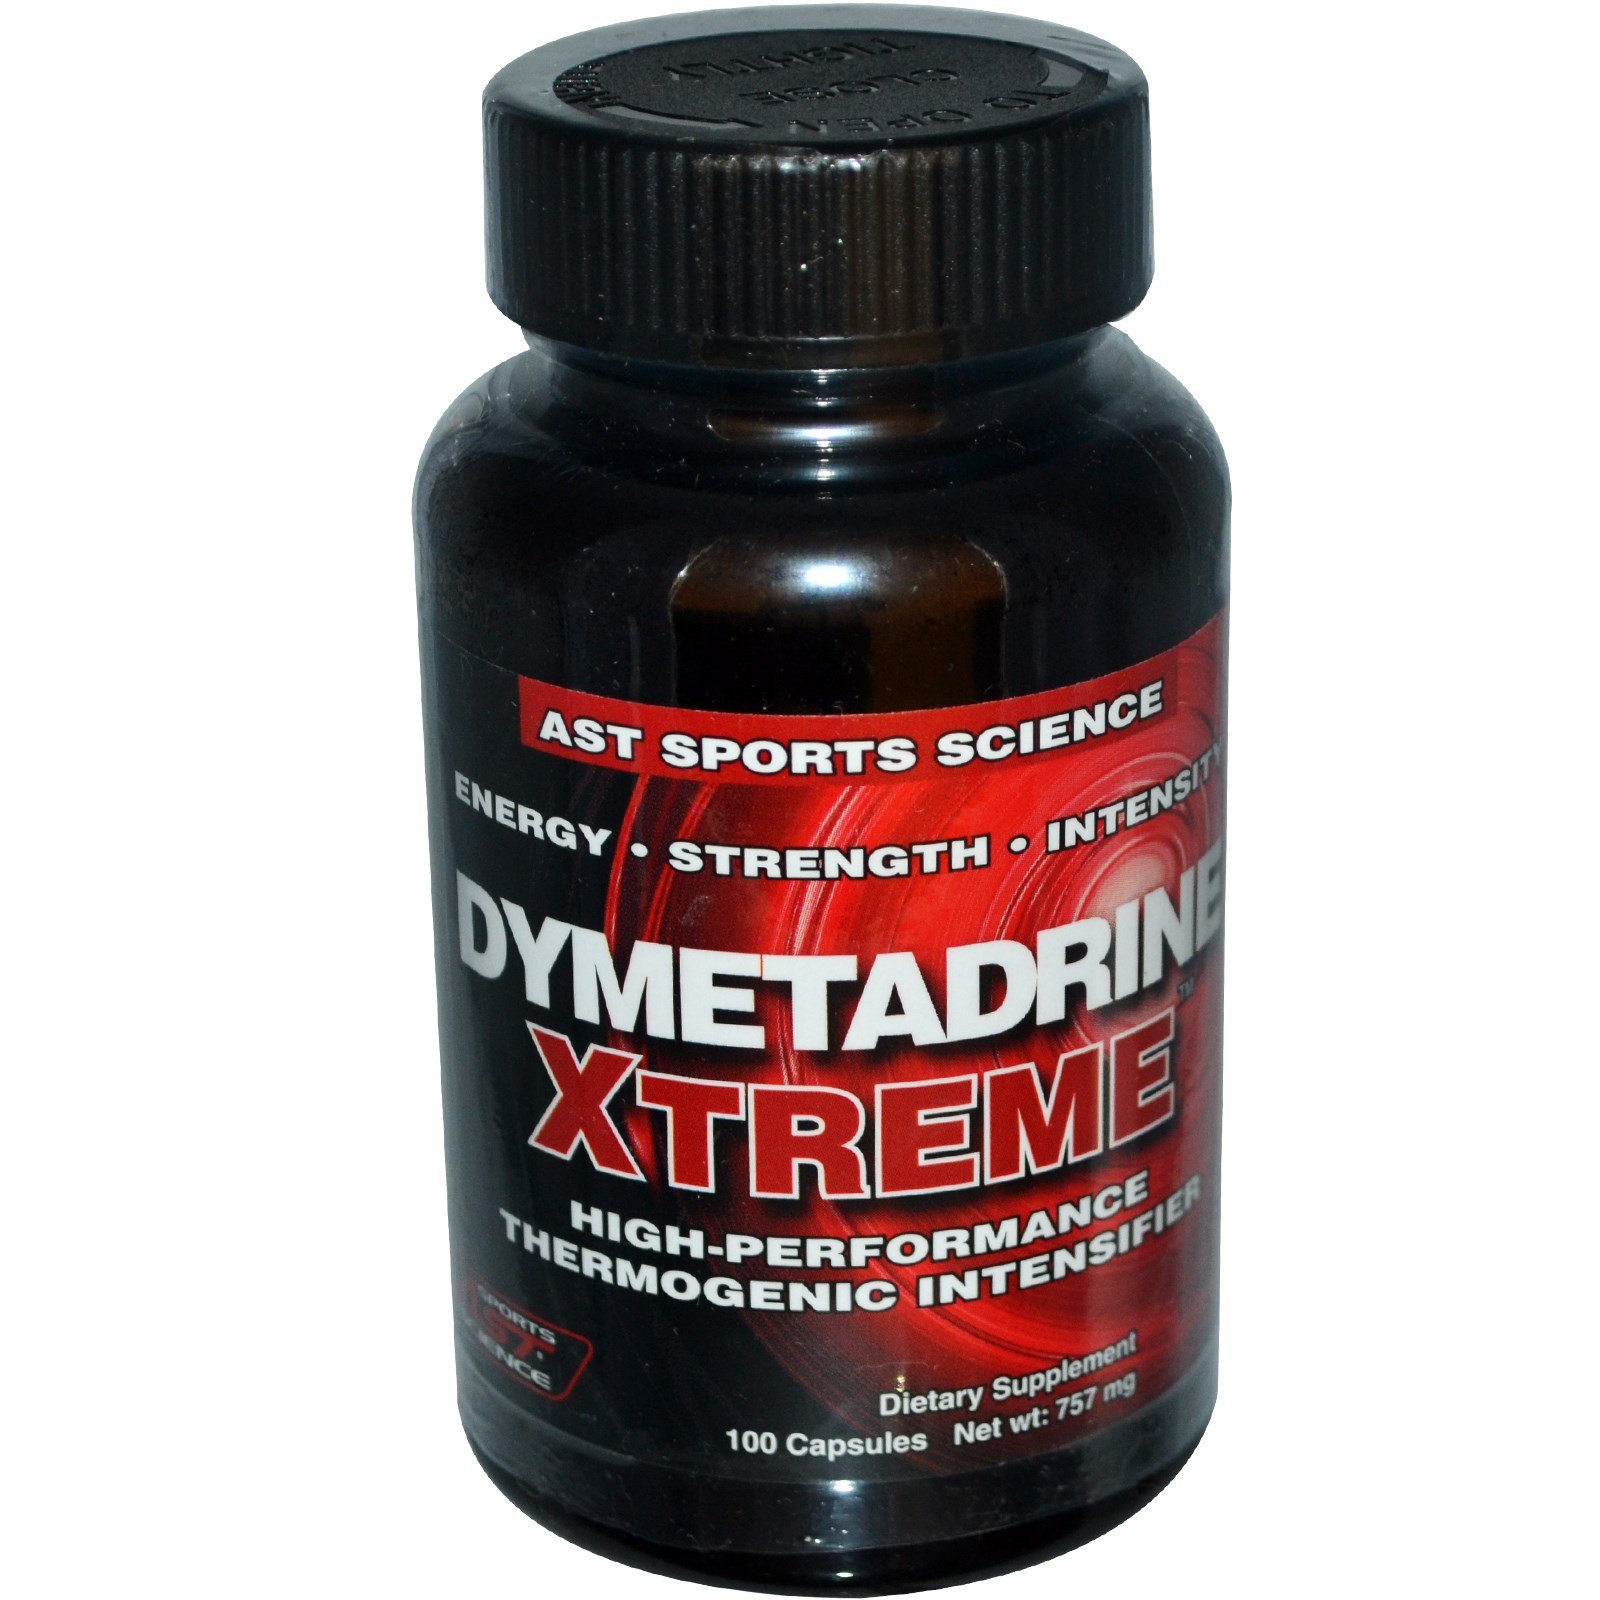 Dymetadrine Xtreme, 100 pcs, AST. Thermogenic. Weight Loss Fat burning 